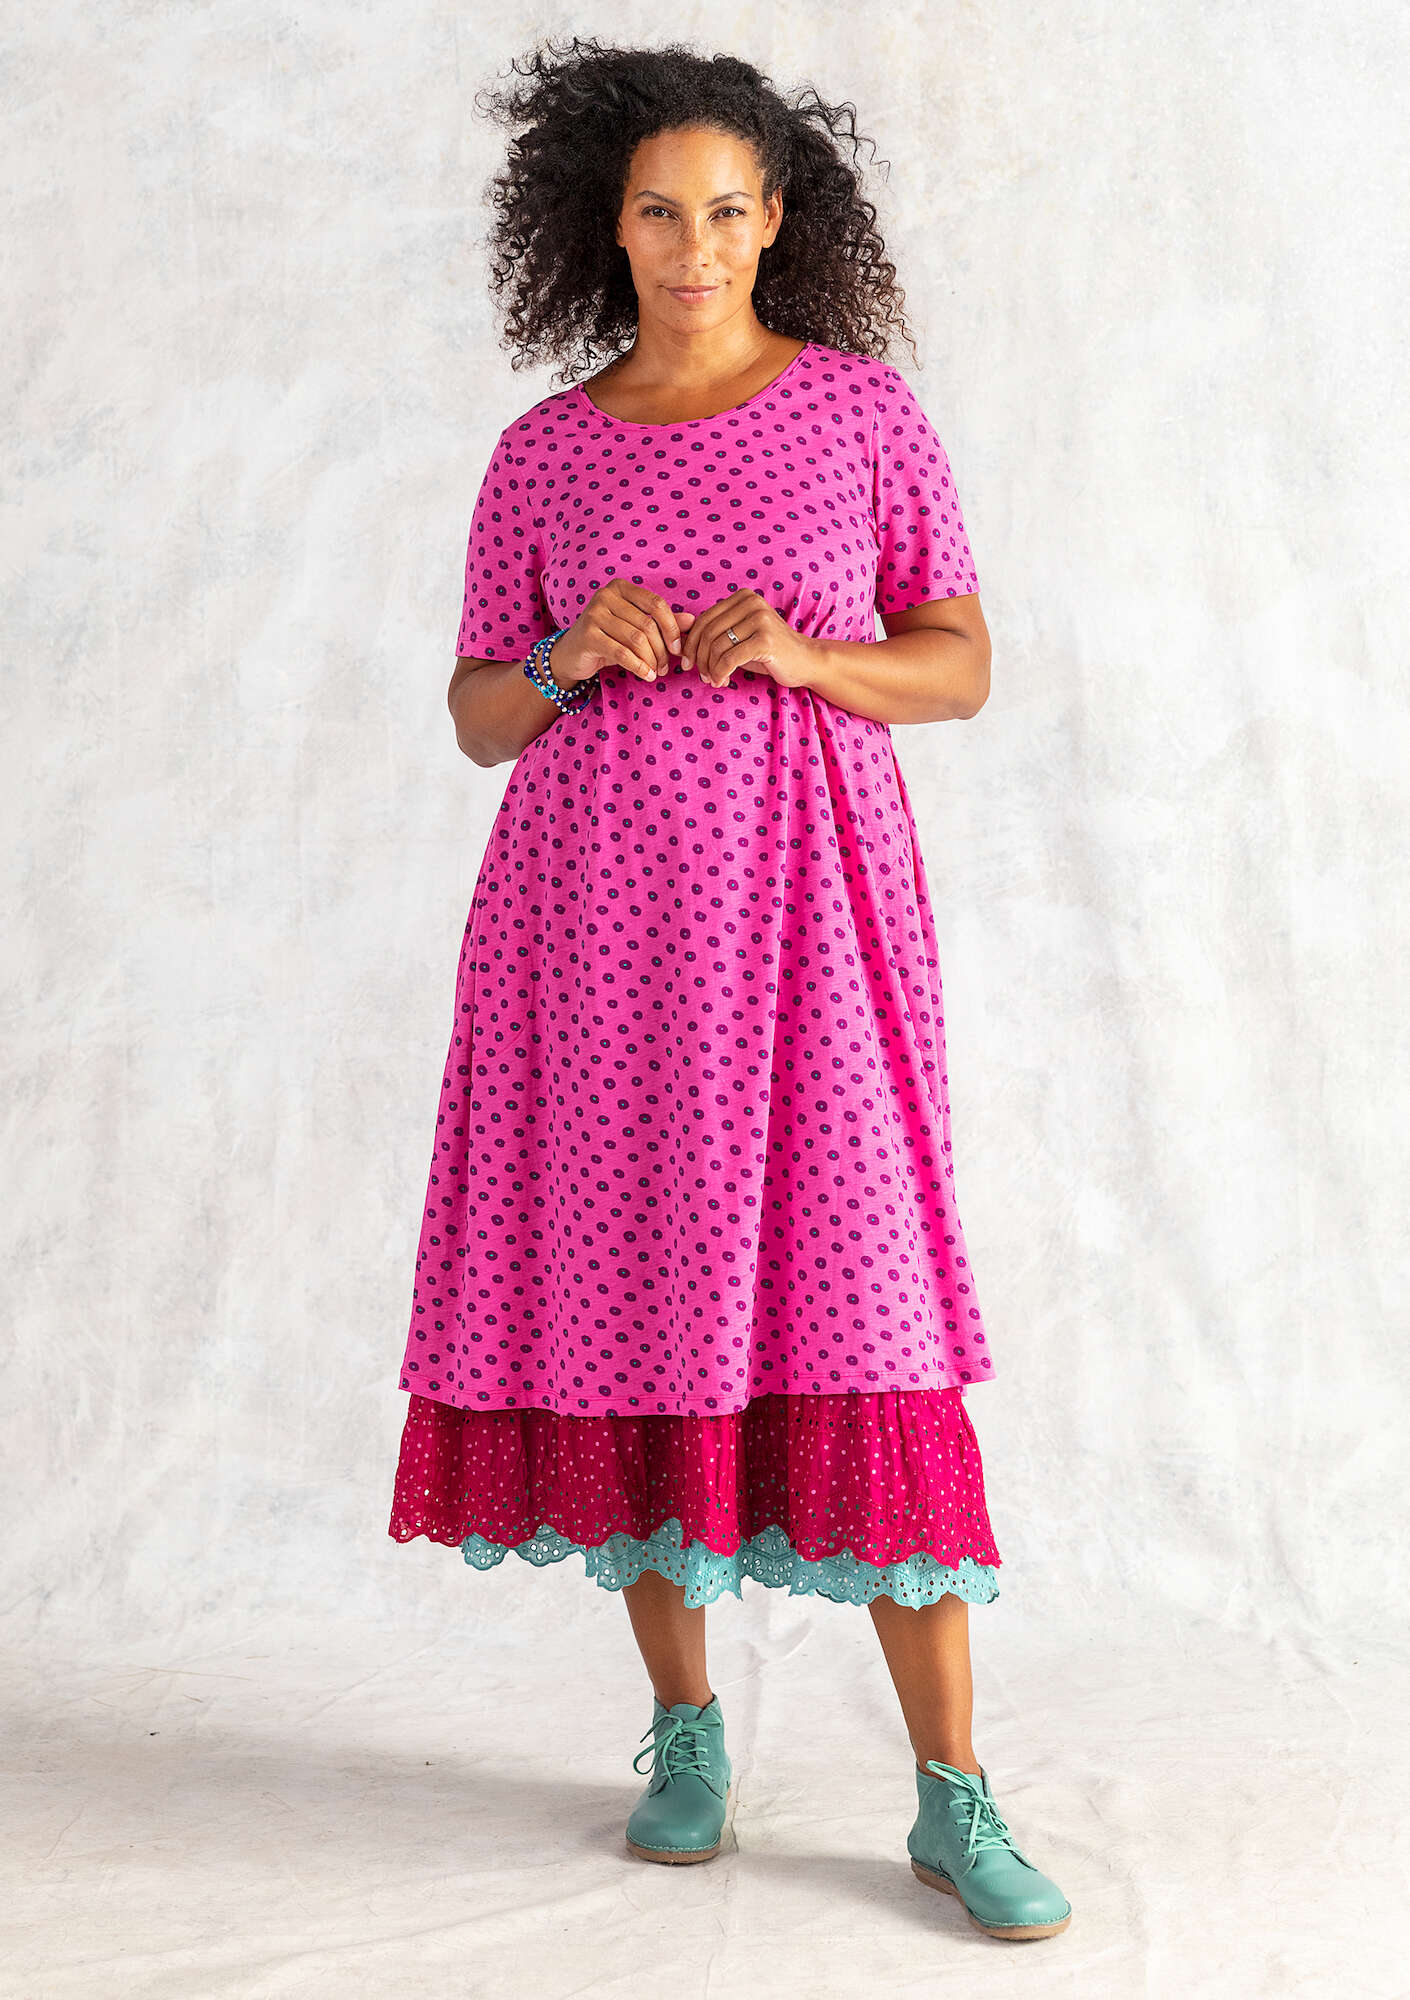 Ines jersey dress wild rose/patterned